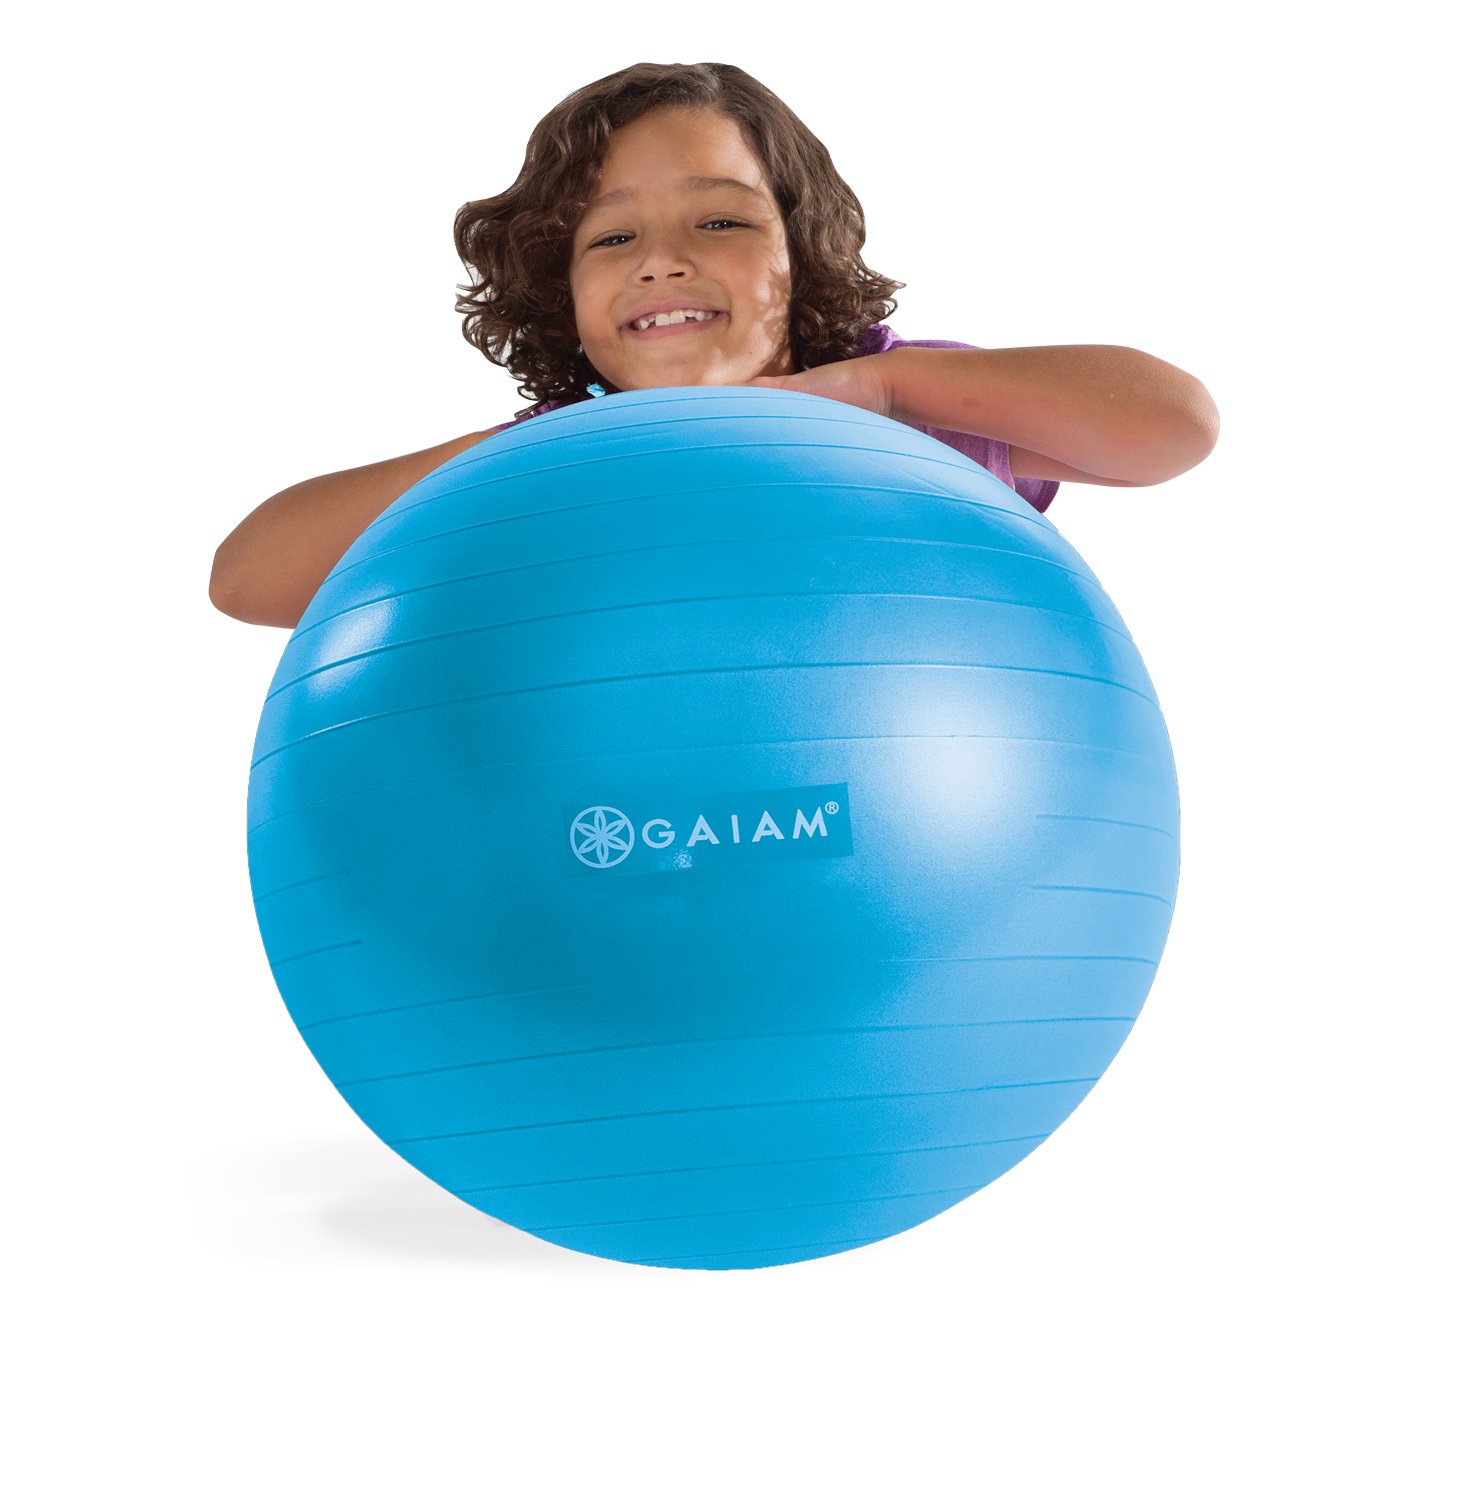 Gaiam Kids Balance Ball - Exercise Stability Yoga Ball, Kids Alternative Flexible Seating for Active Children in Home or Classroom (Satisfaction Guarantee), 45cm